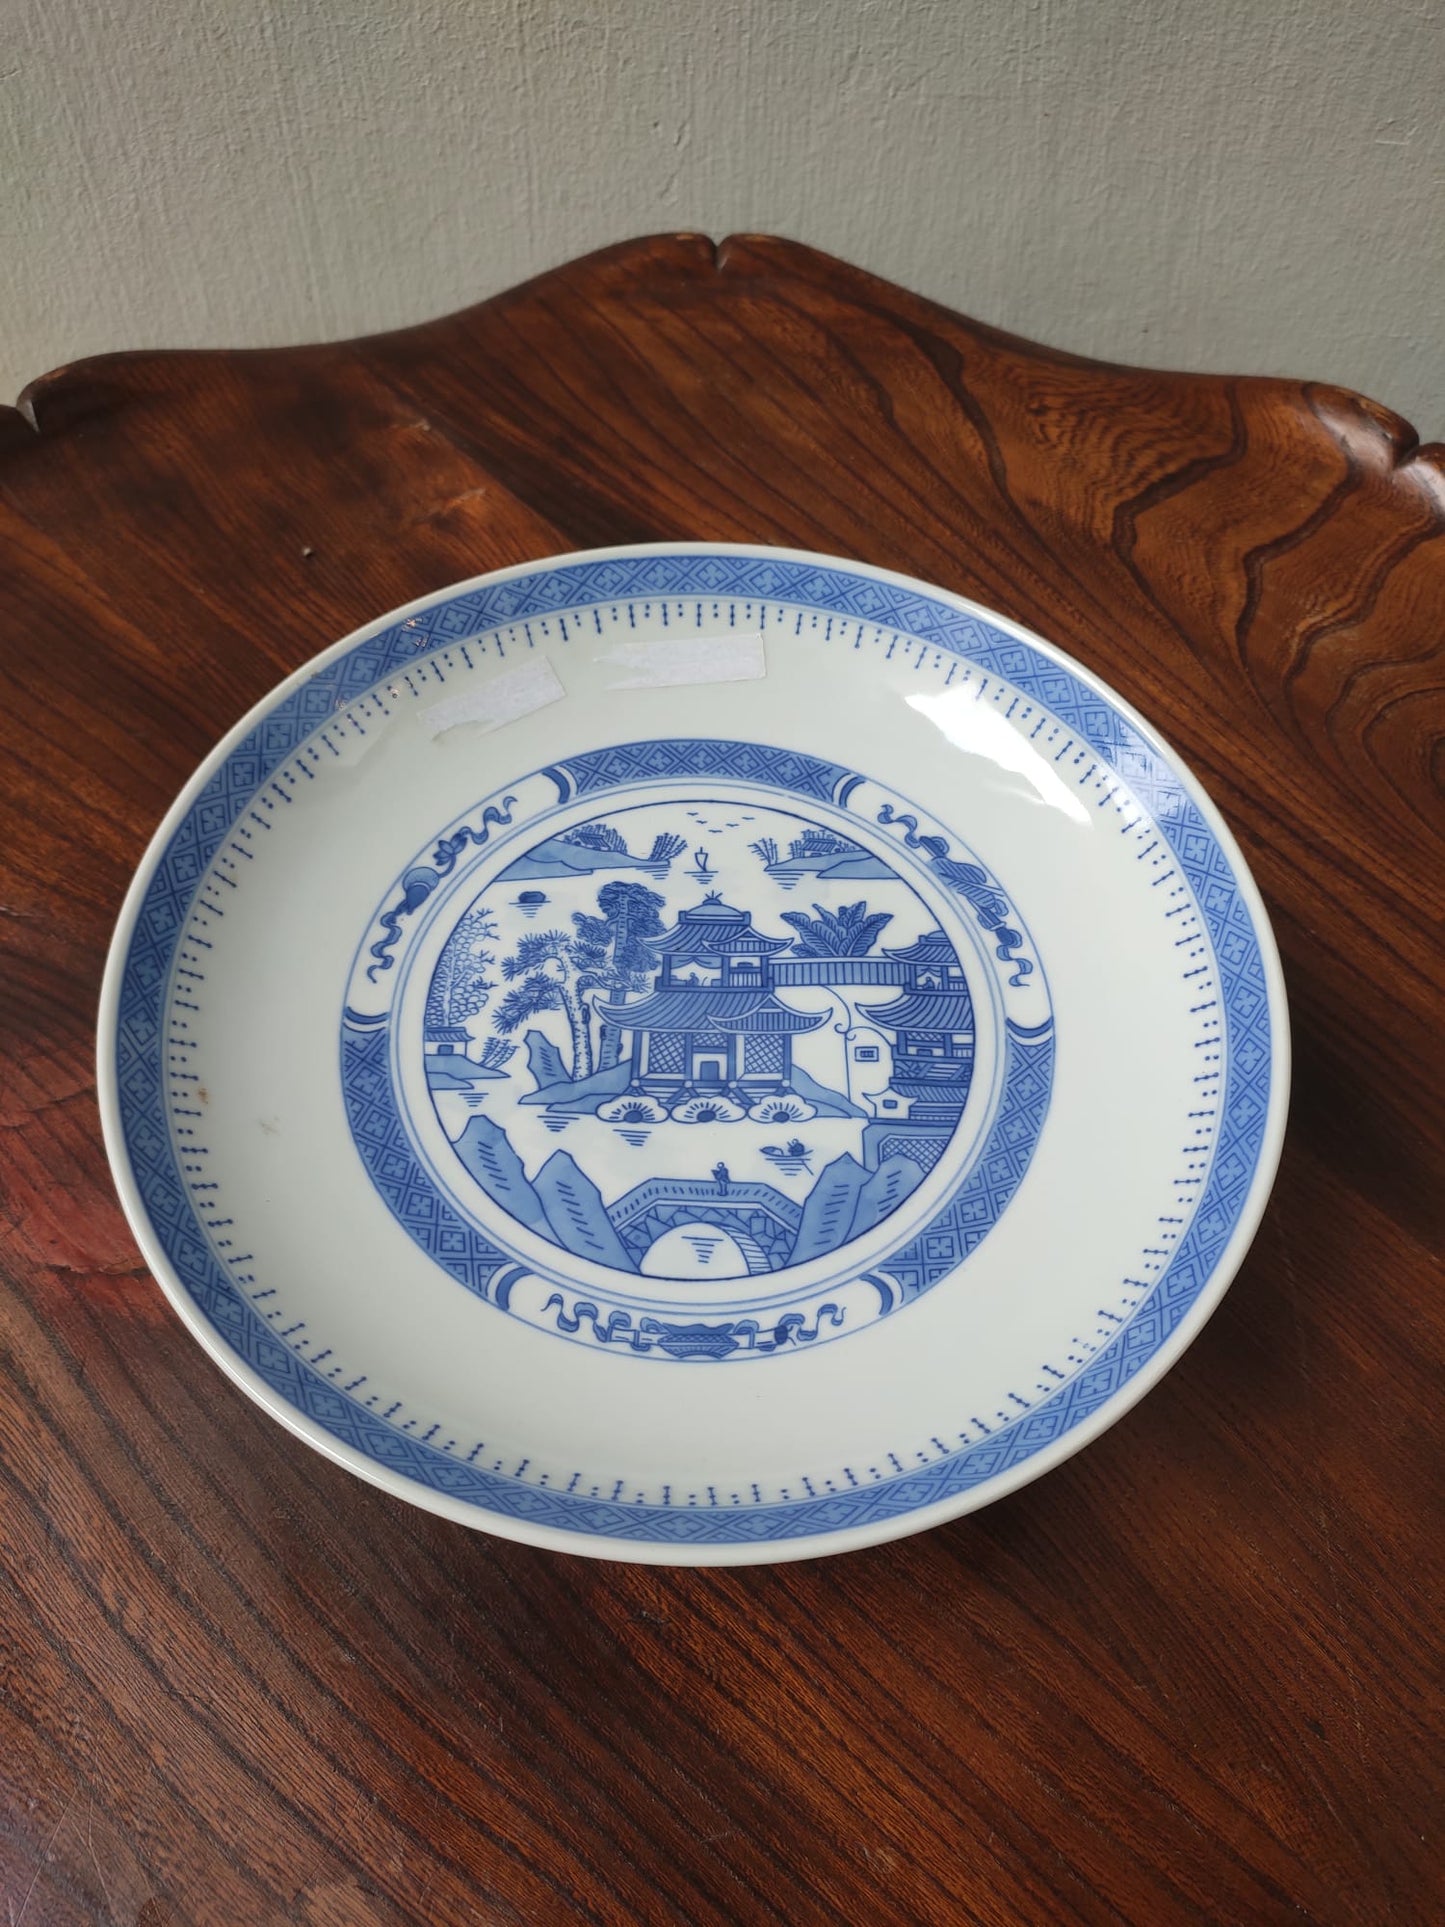 Big Blue and white plate with big foot